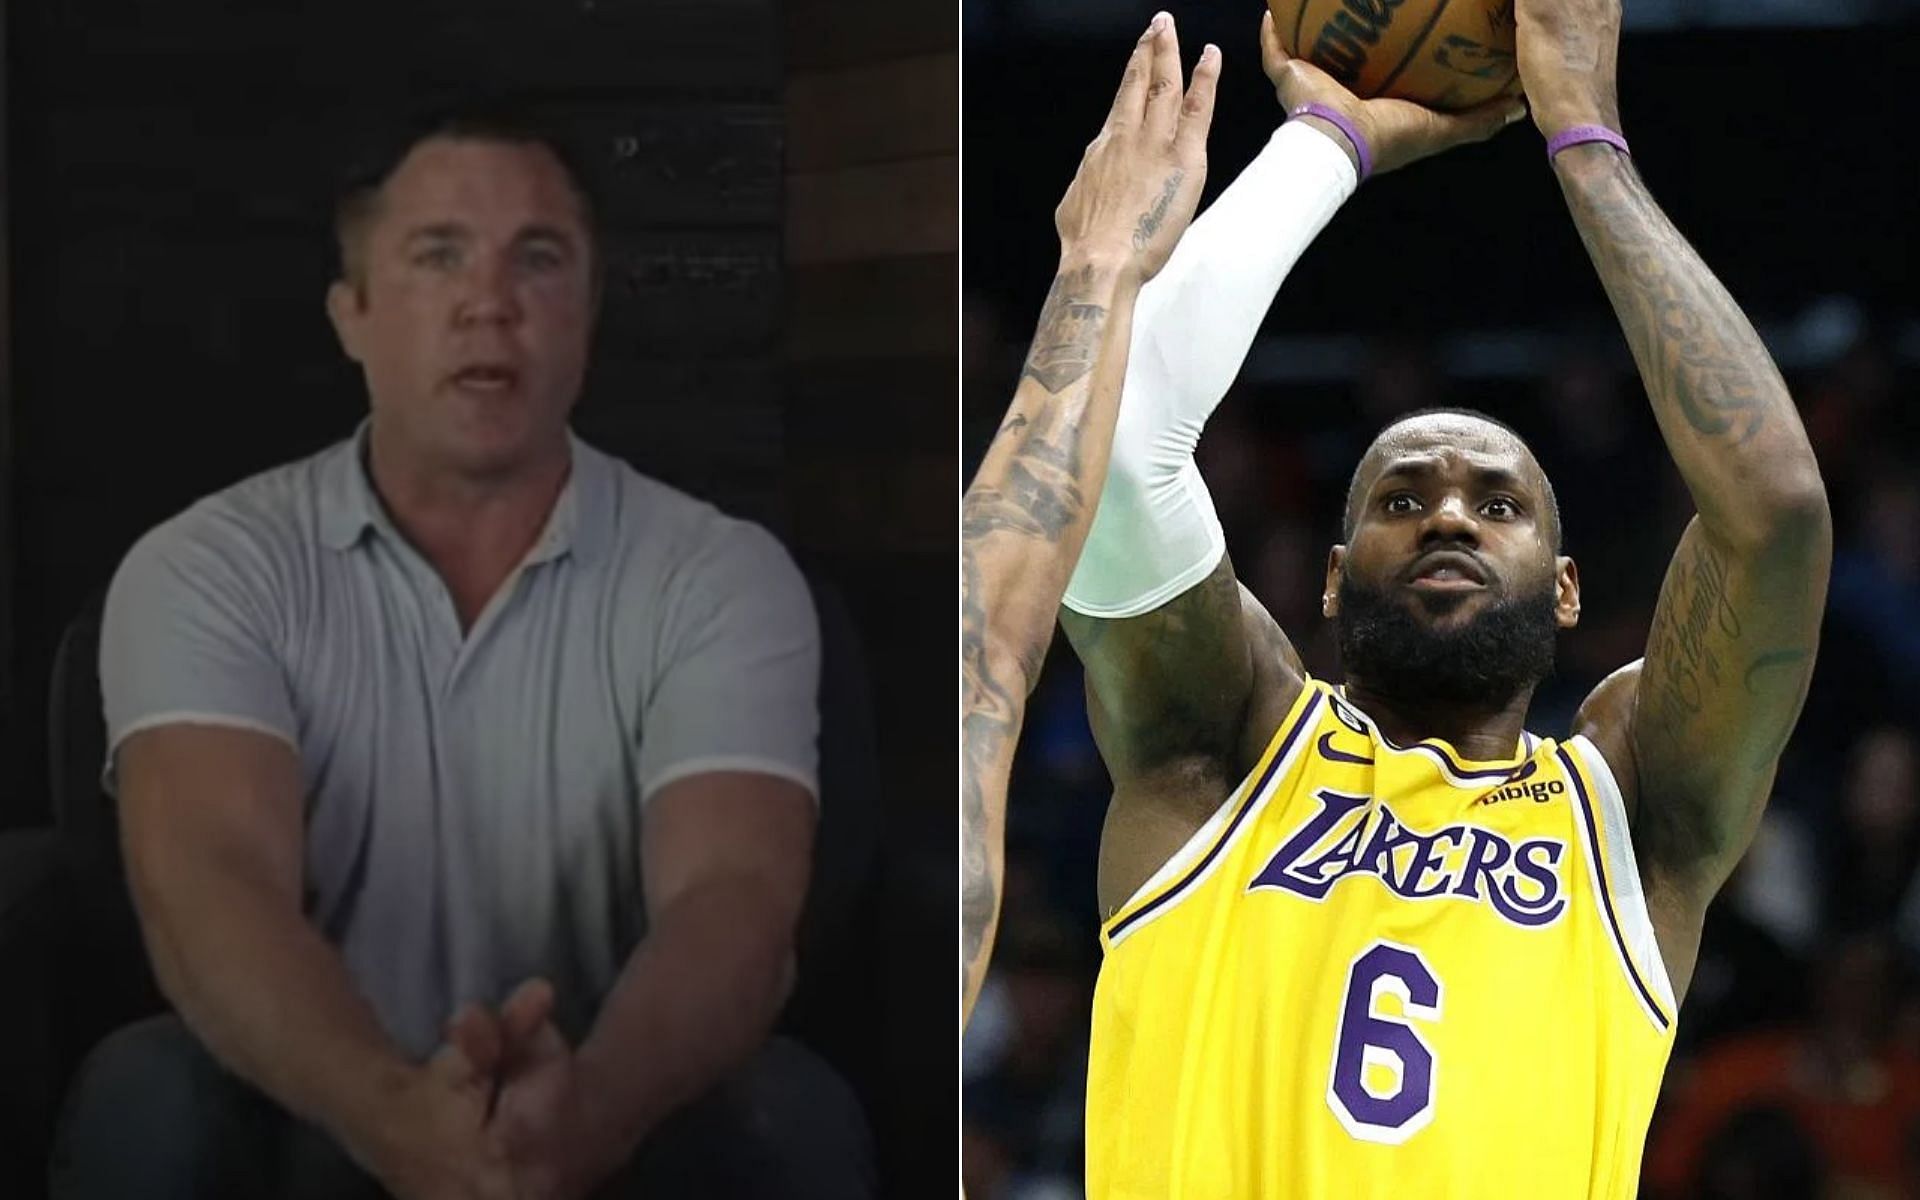 Chael Sonnen [Left], and LeBron James [Right] [Photo credit: Chael Sonnen - YouTube]